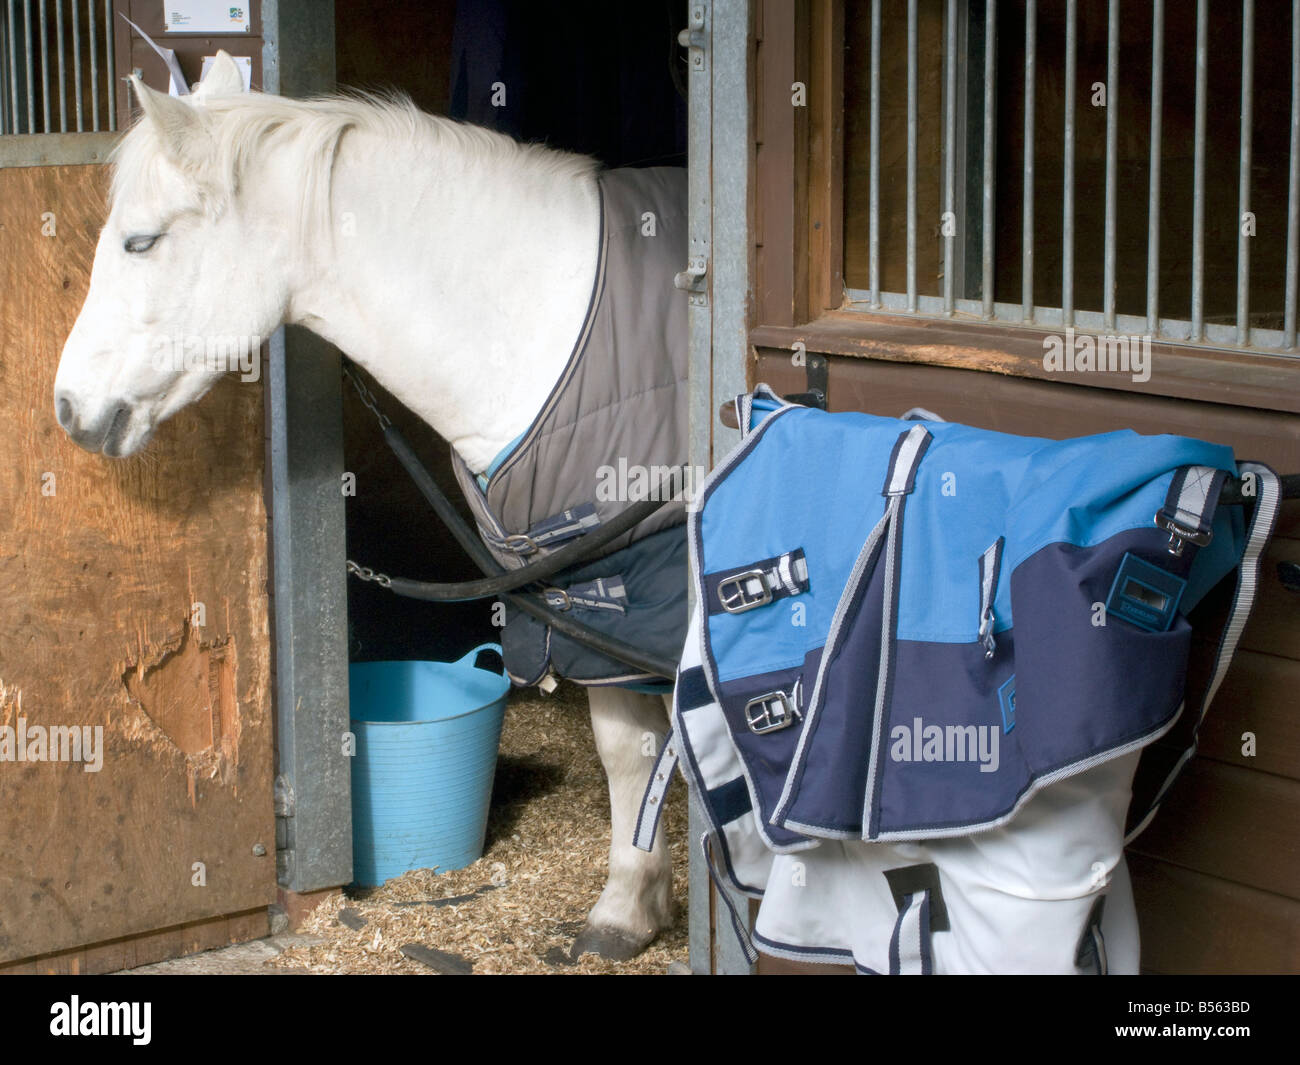 UK- Horse stables at Lee Valley Riding Centre and nature reserve in London Photo © Julio Etchart Stock Photo